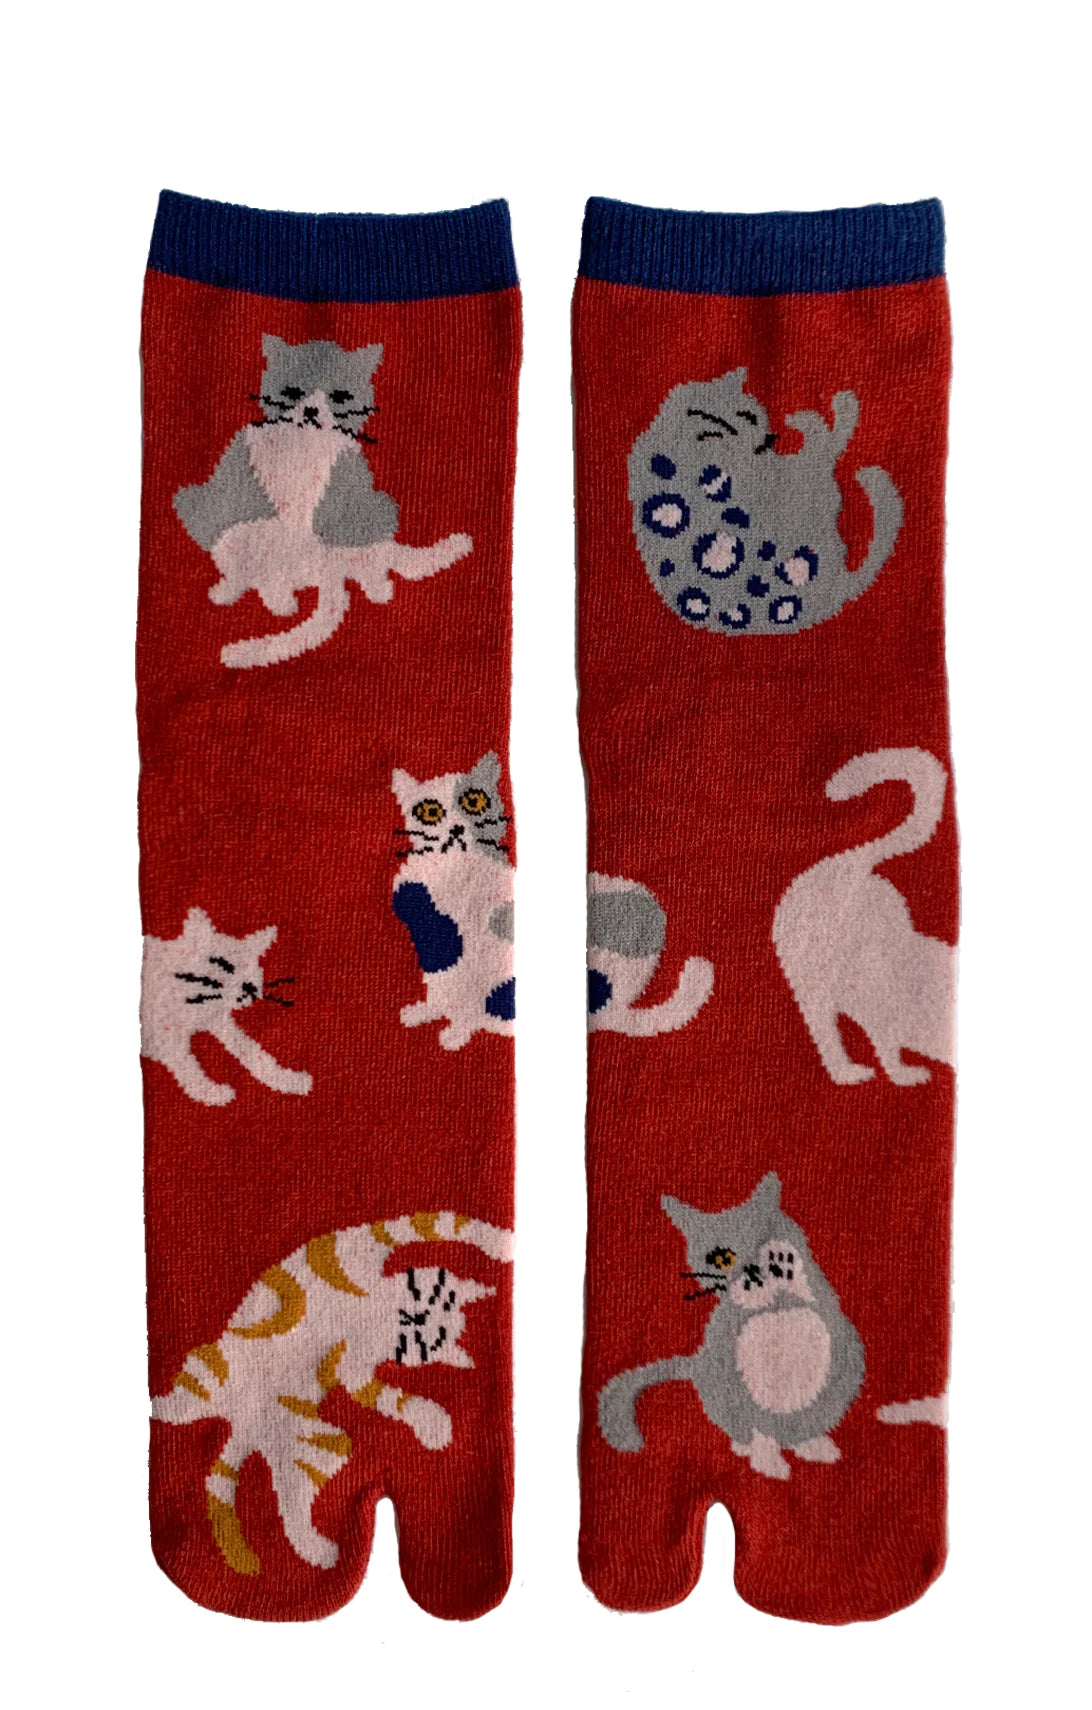 Cats Neko Tabi Toe Socks by NINJA SOCKS in the color Red with various patterns of cats